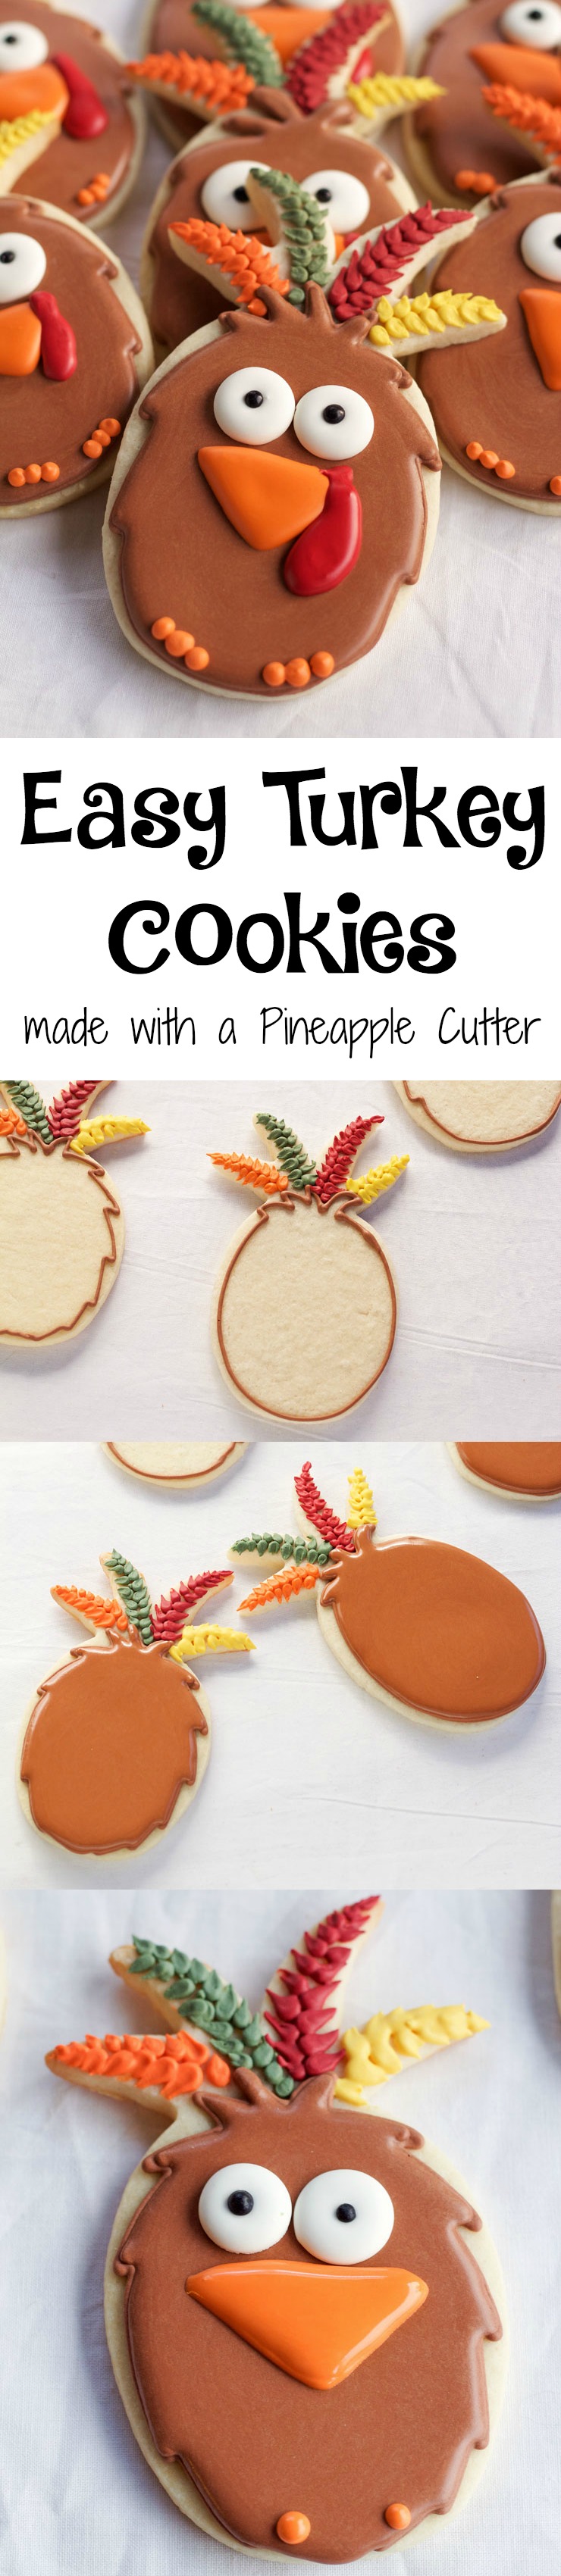 Easy Turkey Cookies made with a Pineapple Cookie Cutter | The Bearfoot Baker